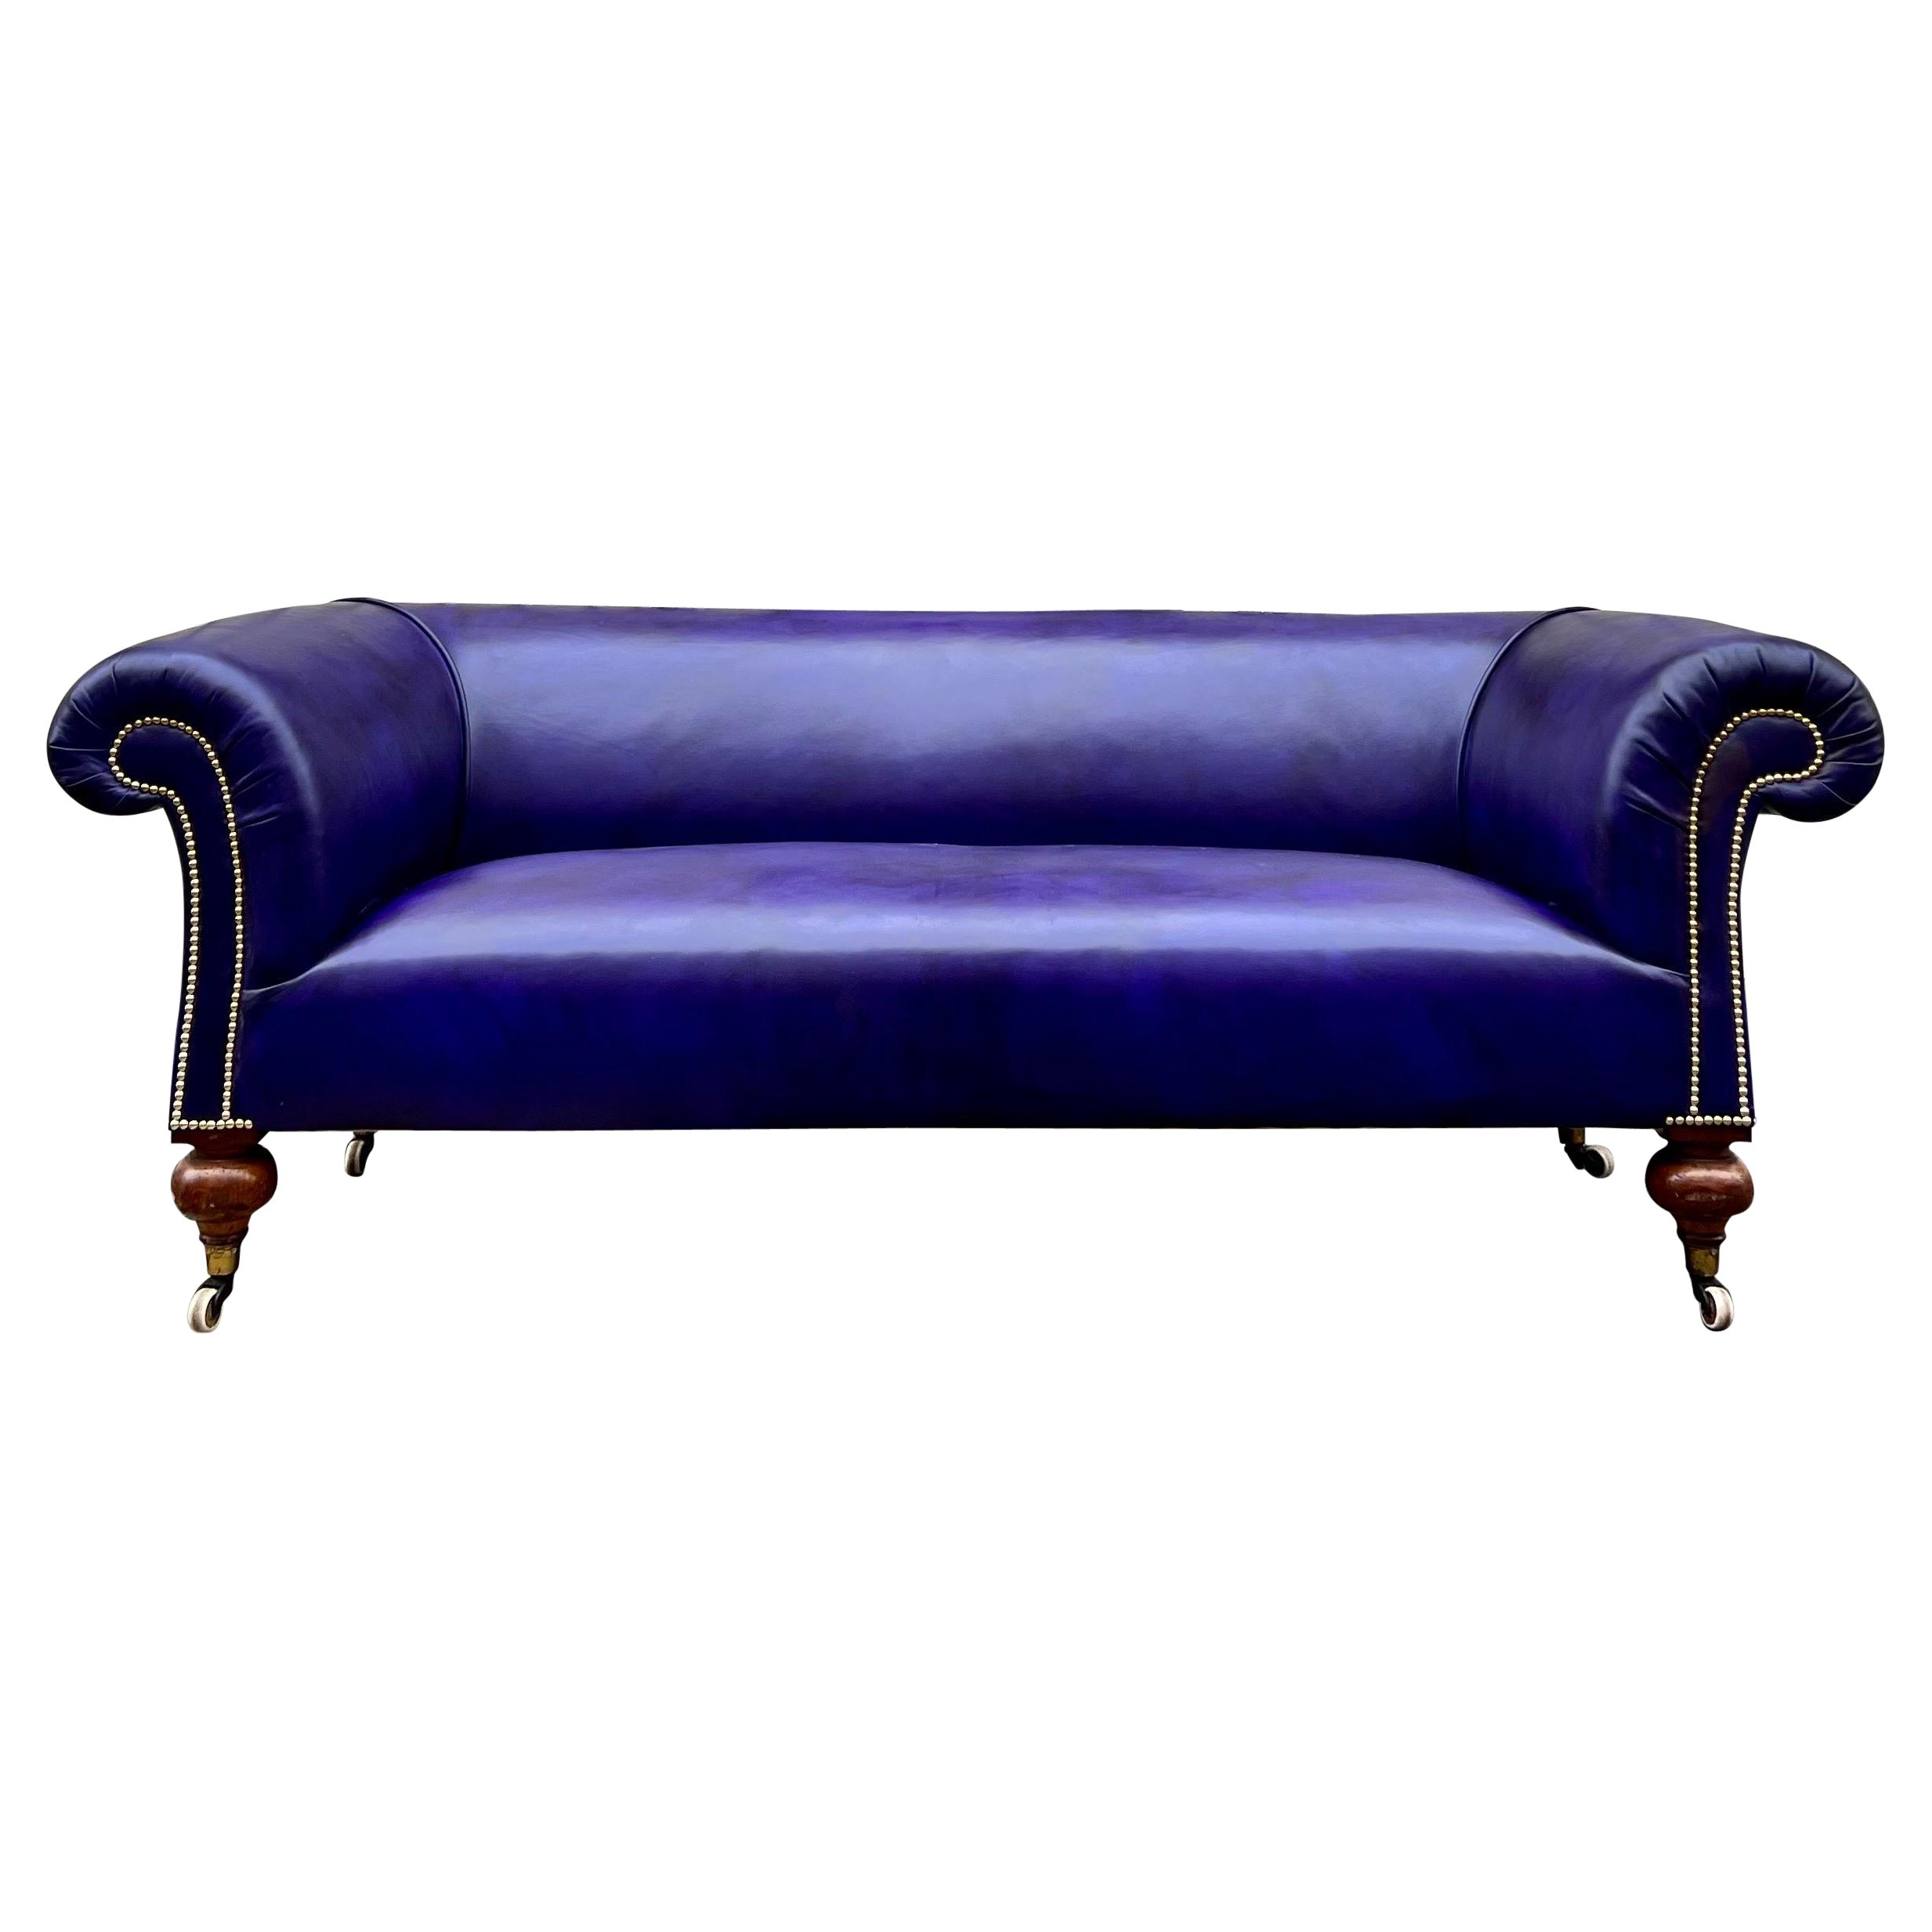 Fully Restored 19thC Chesterfield Sofa in Hand Dyed Leathers